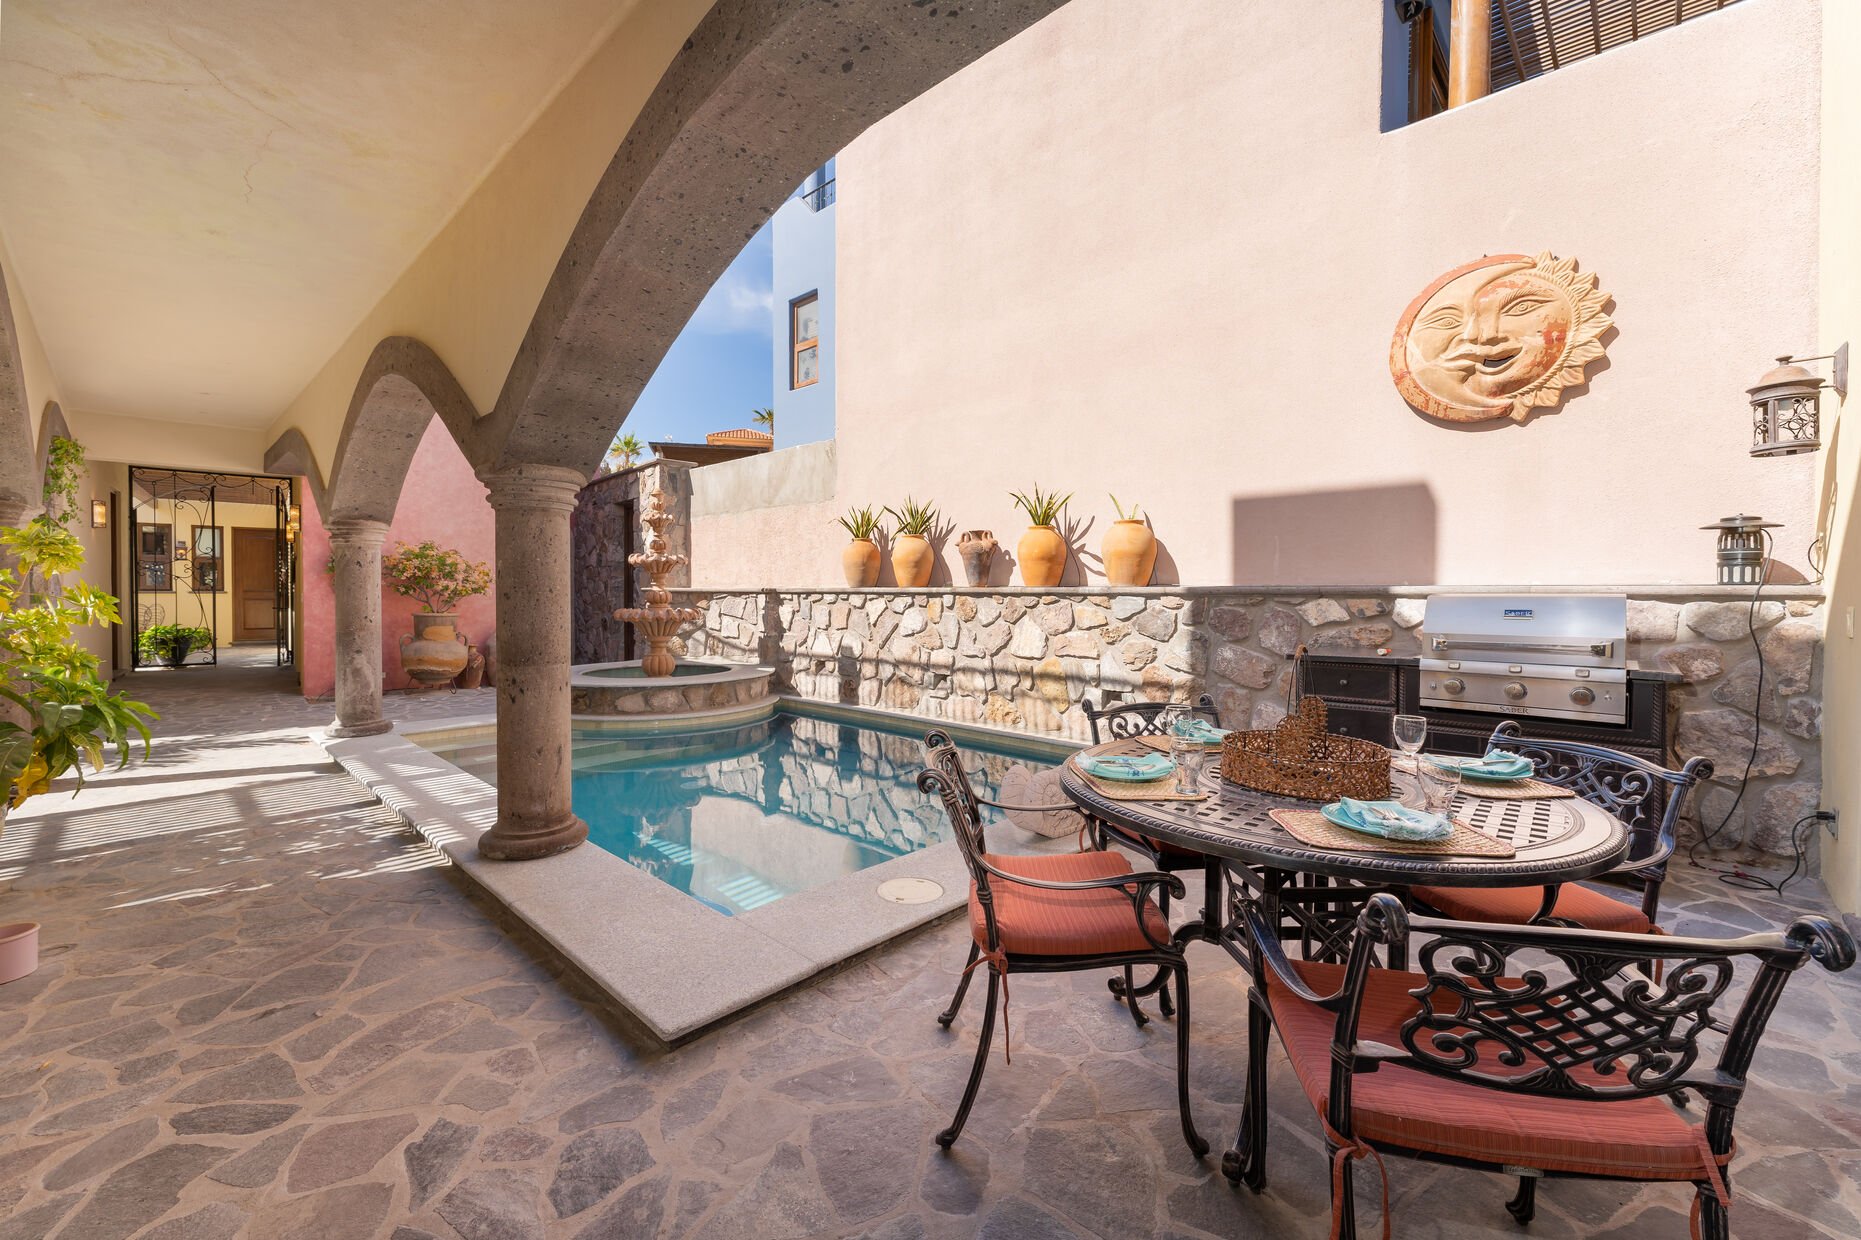 Pool courtyard with outdoor shower, fountain, BBQ area and outdoor dining